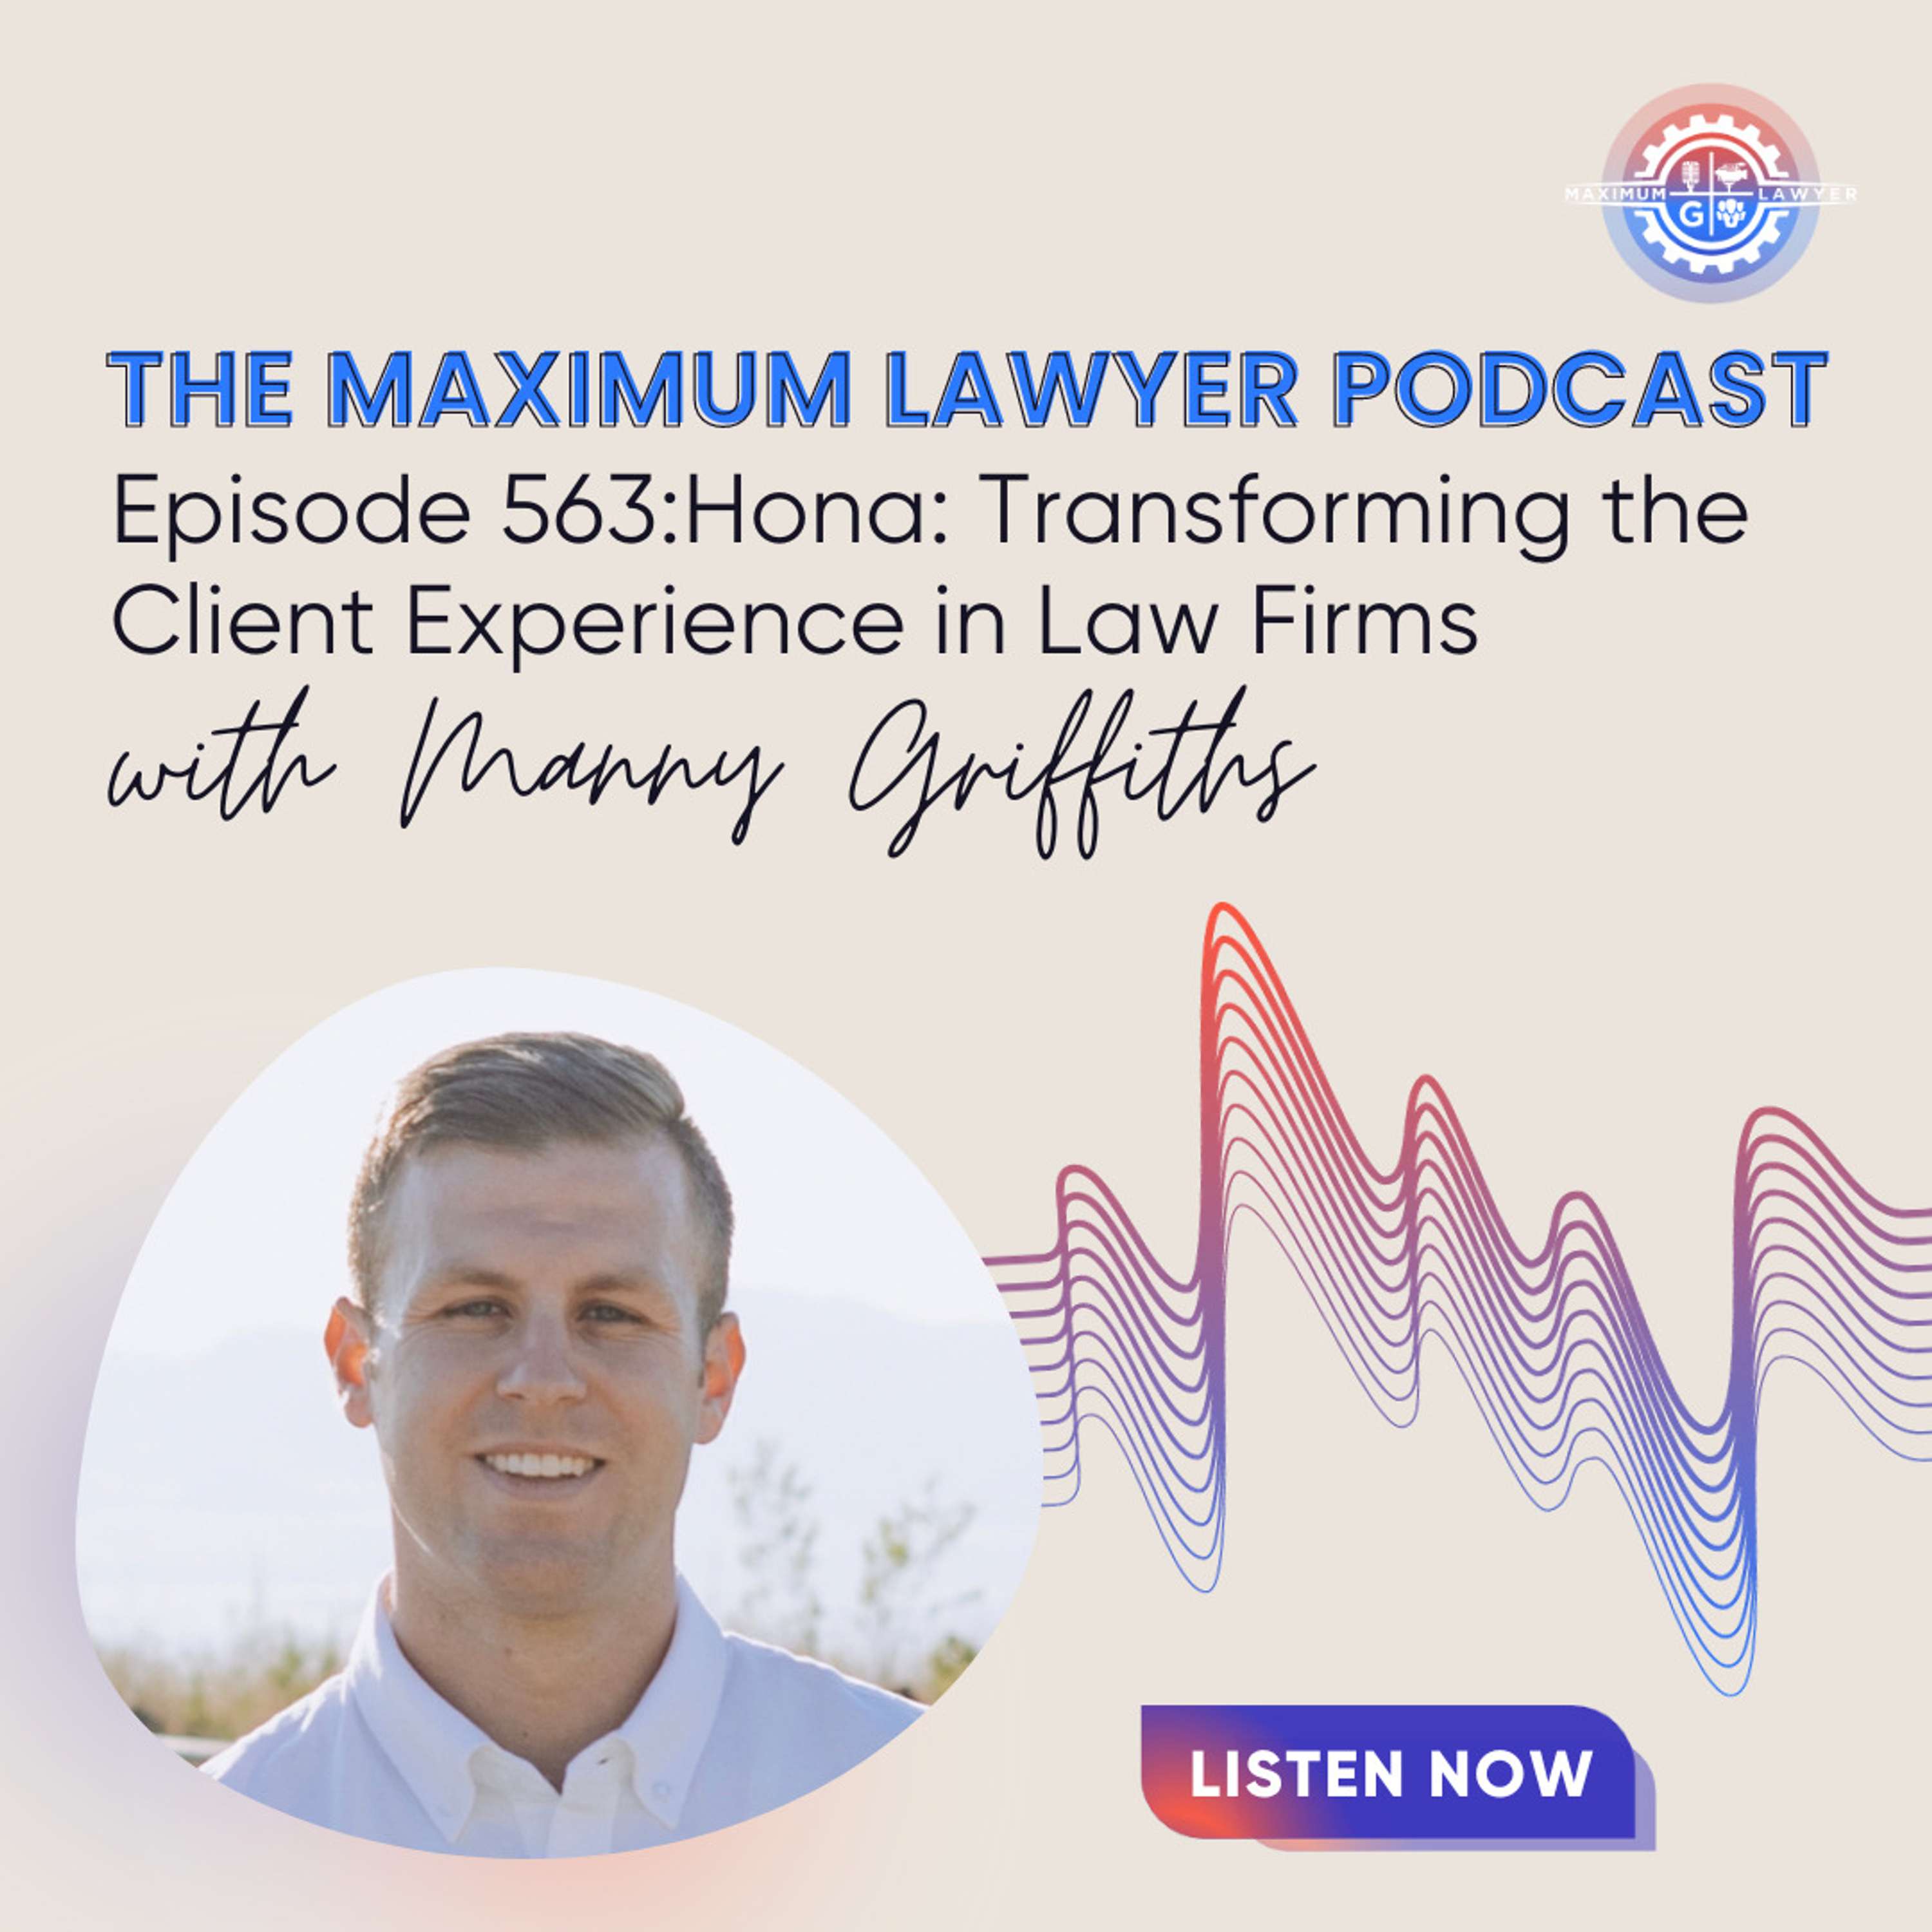 Hona: Transforming the Client Experience in Law Firms with Manny Griffiths